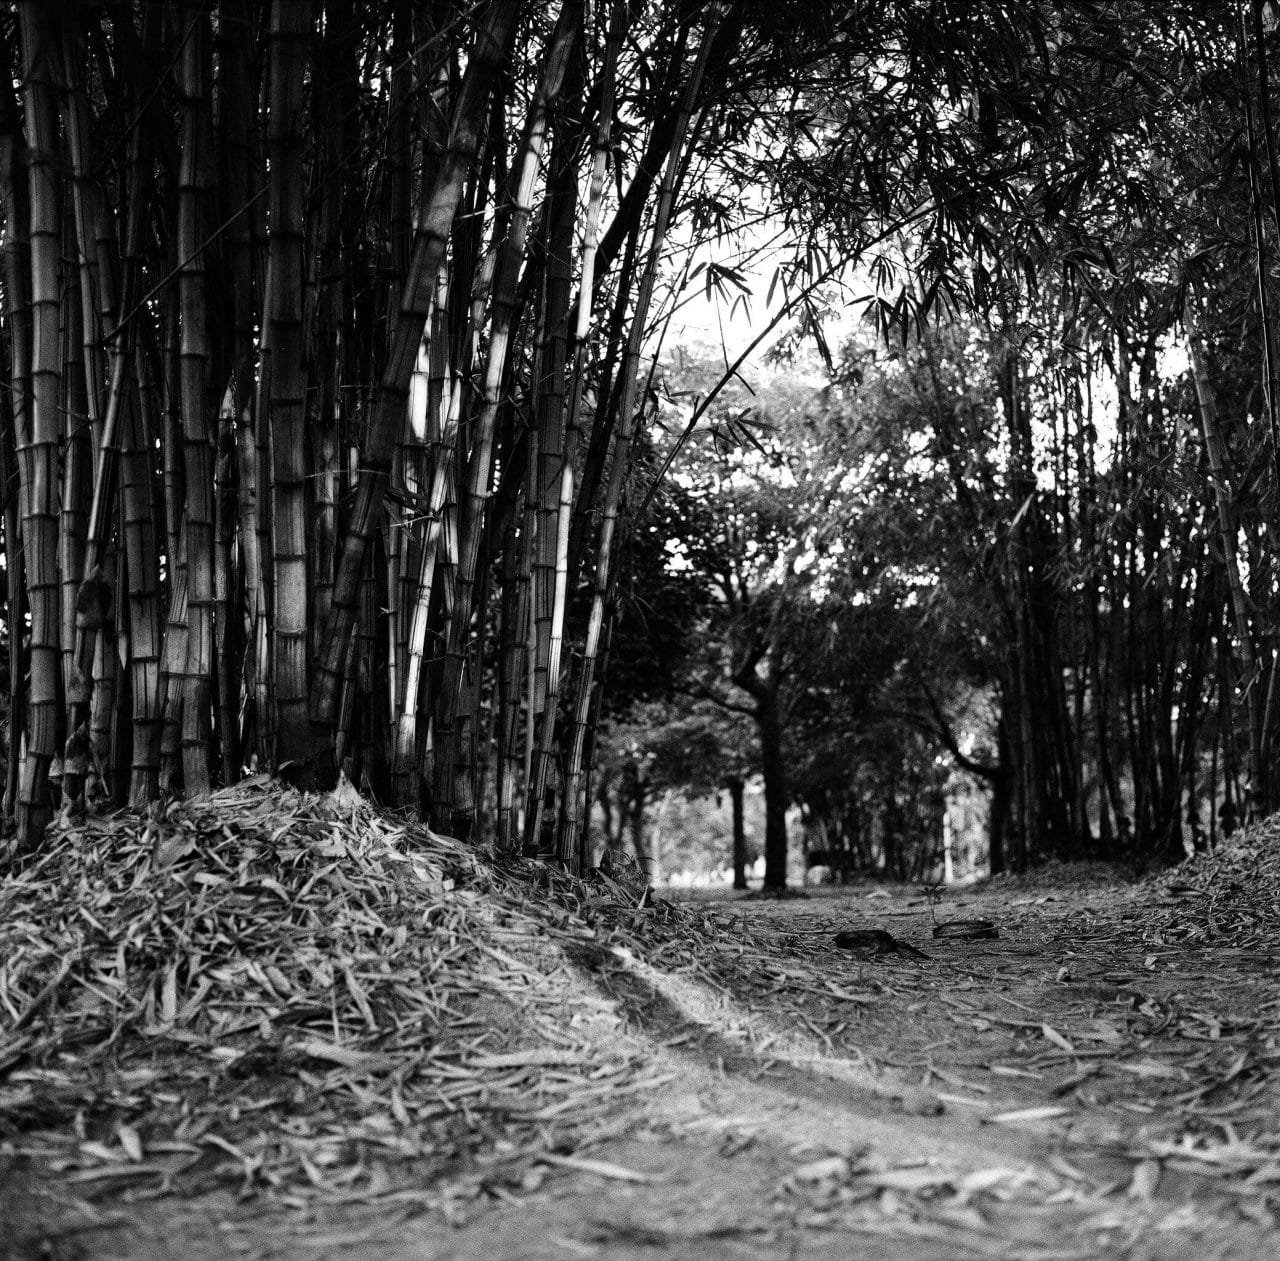 Bamboo Glade - Shot on ILFORD HP5 PLUS at EI 800. Black and white negative film in 120 format shot as 6x6. Pushed one stop.